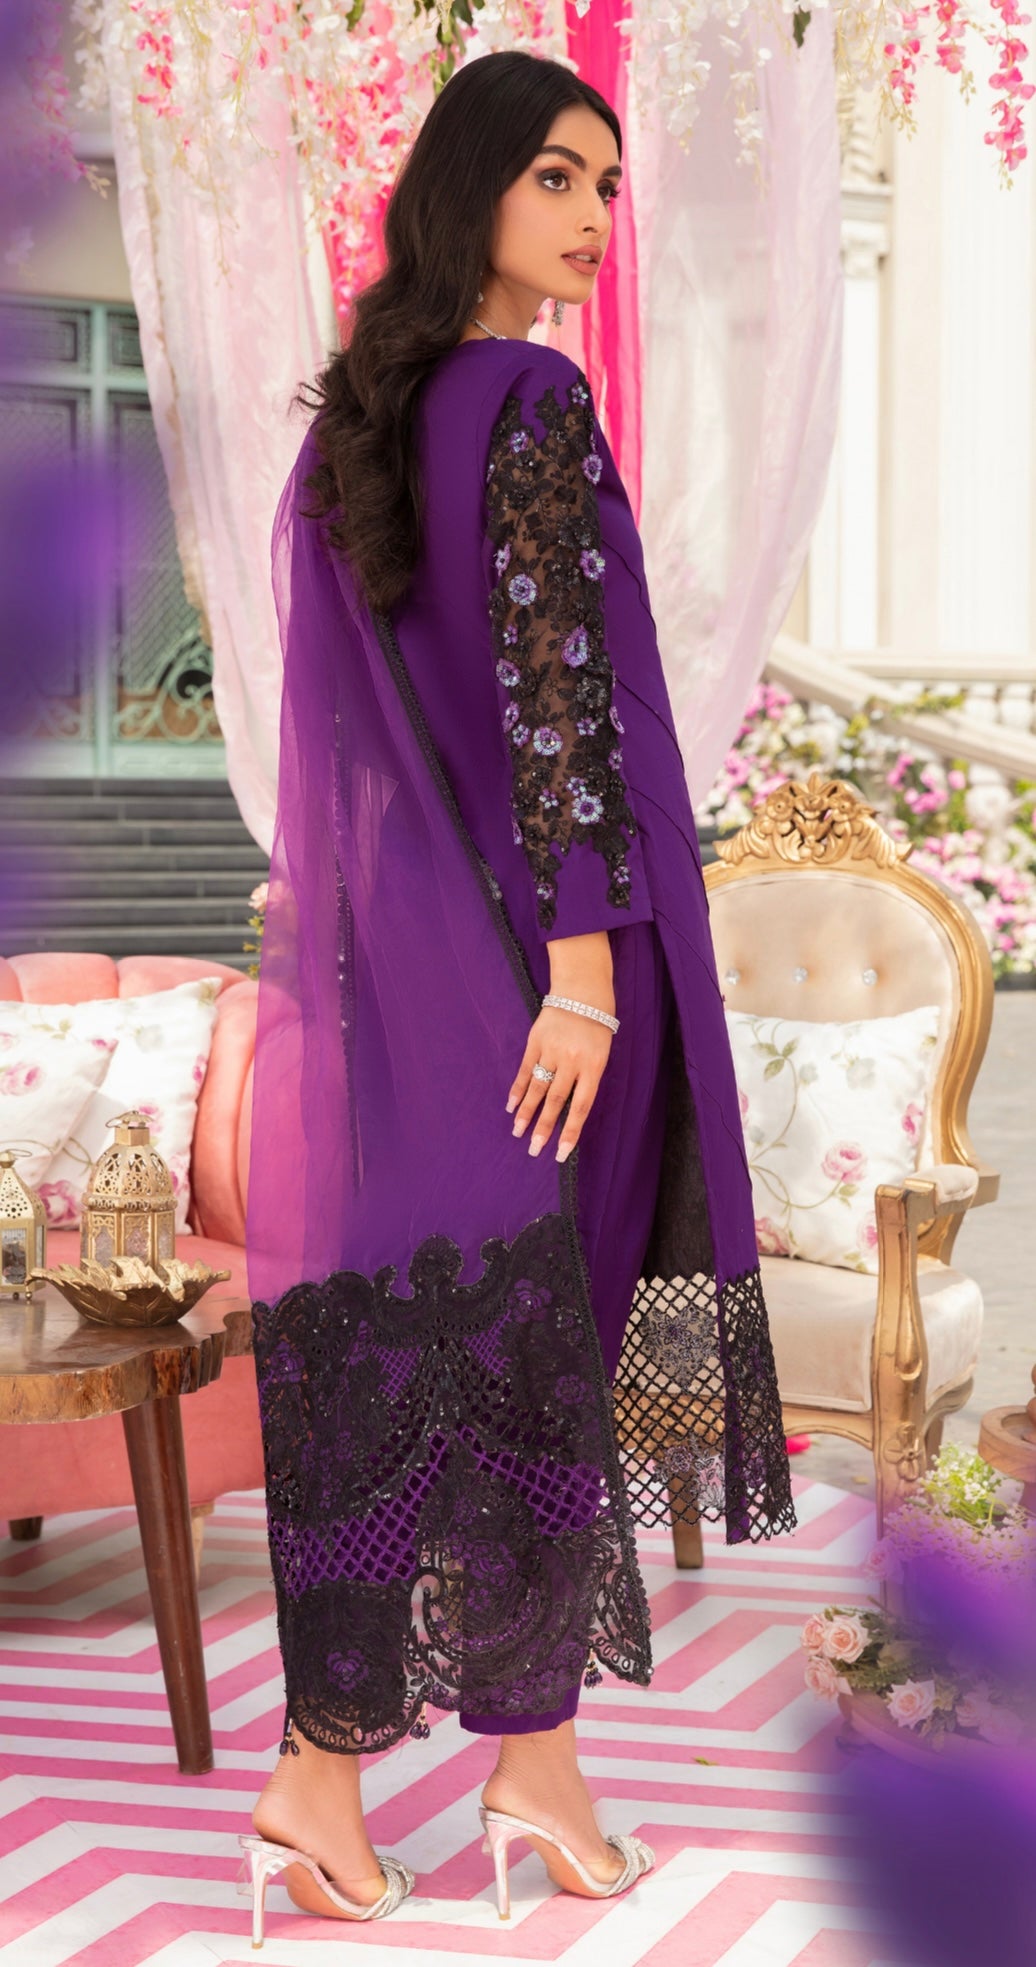 SIMRANS Ivana mother and daughter luxury lawn suit in PURPLE SIL302